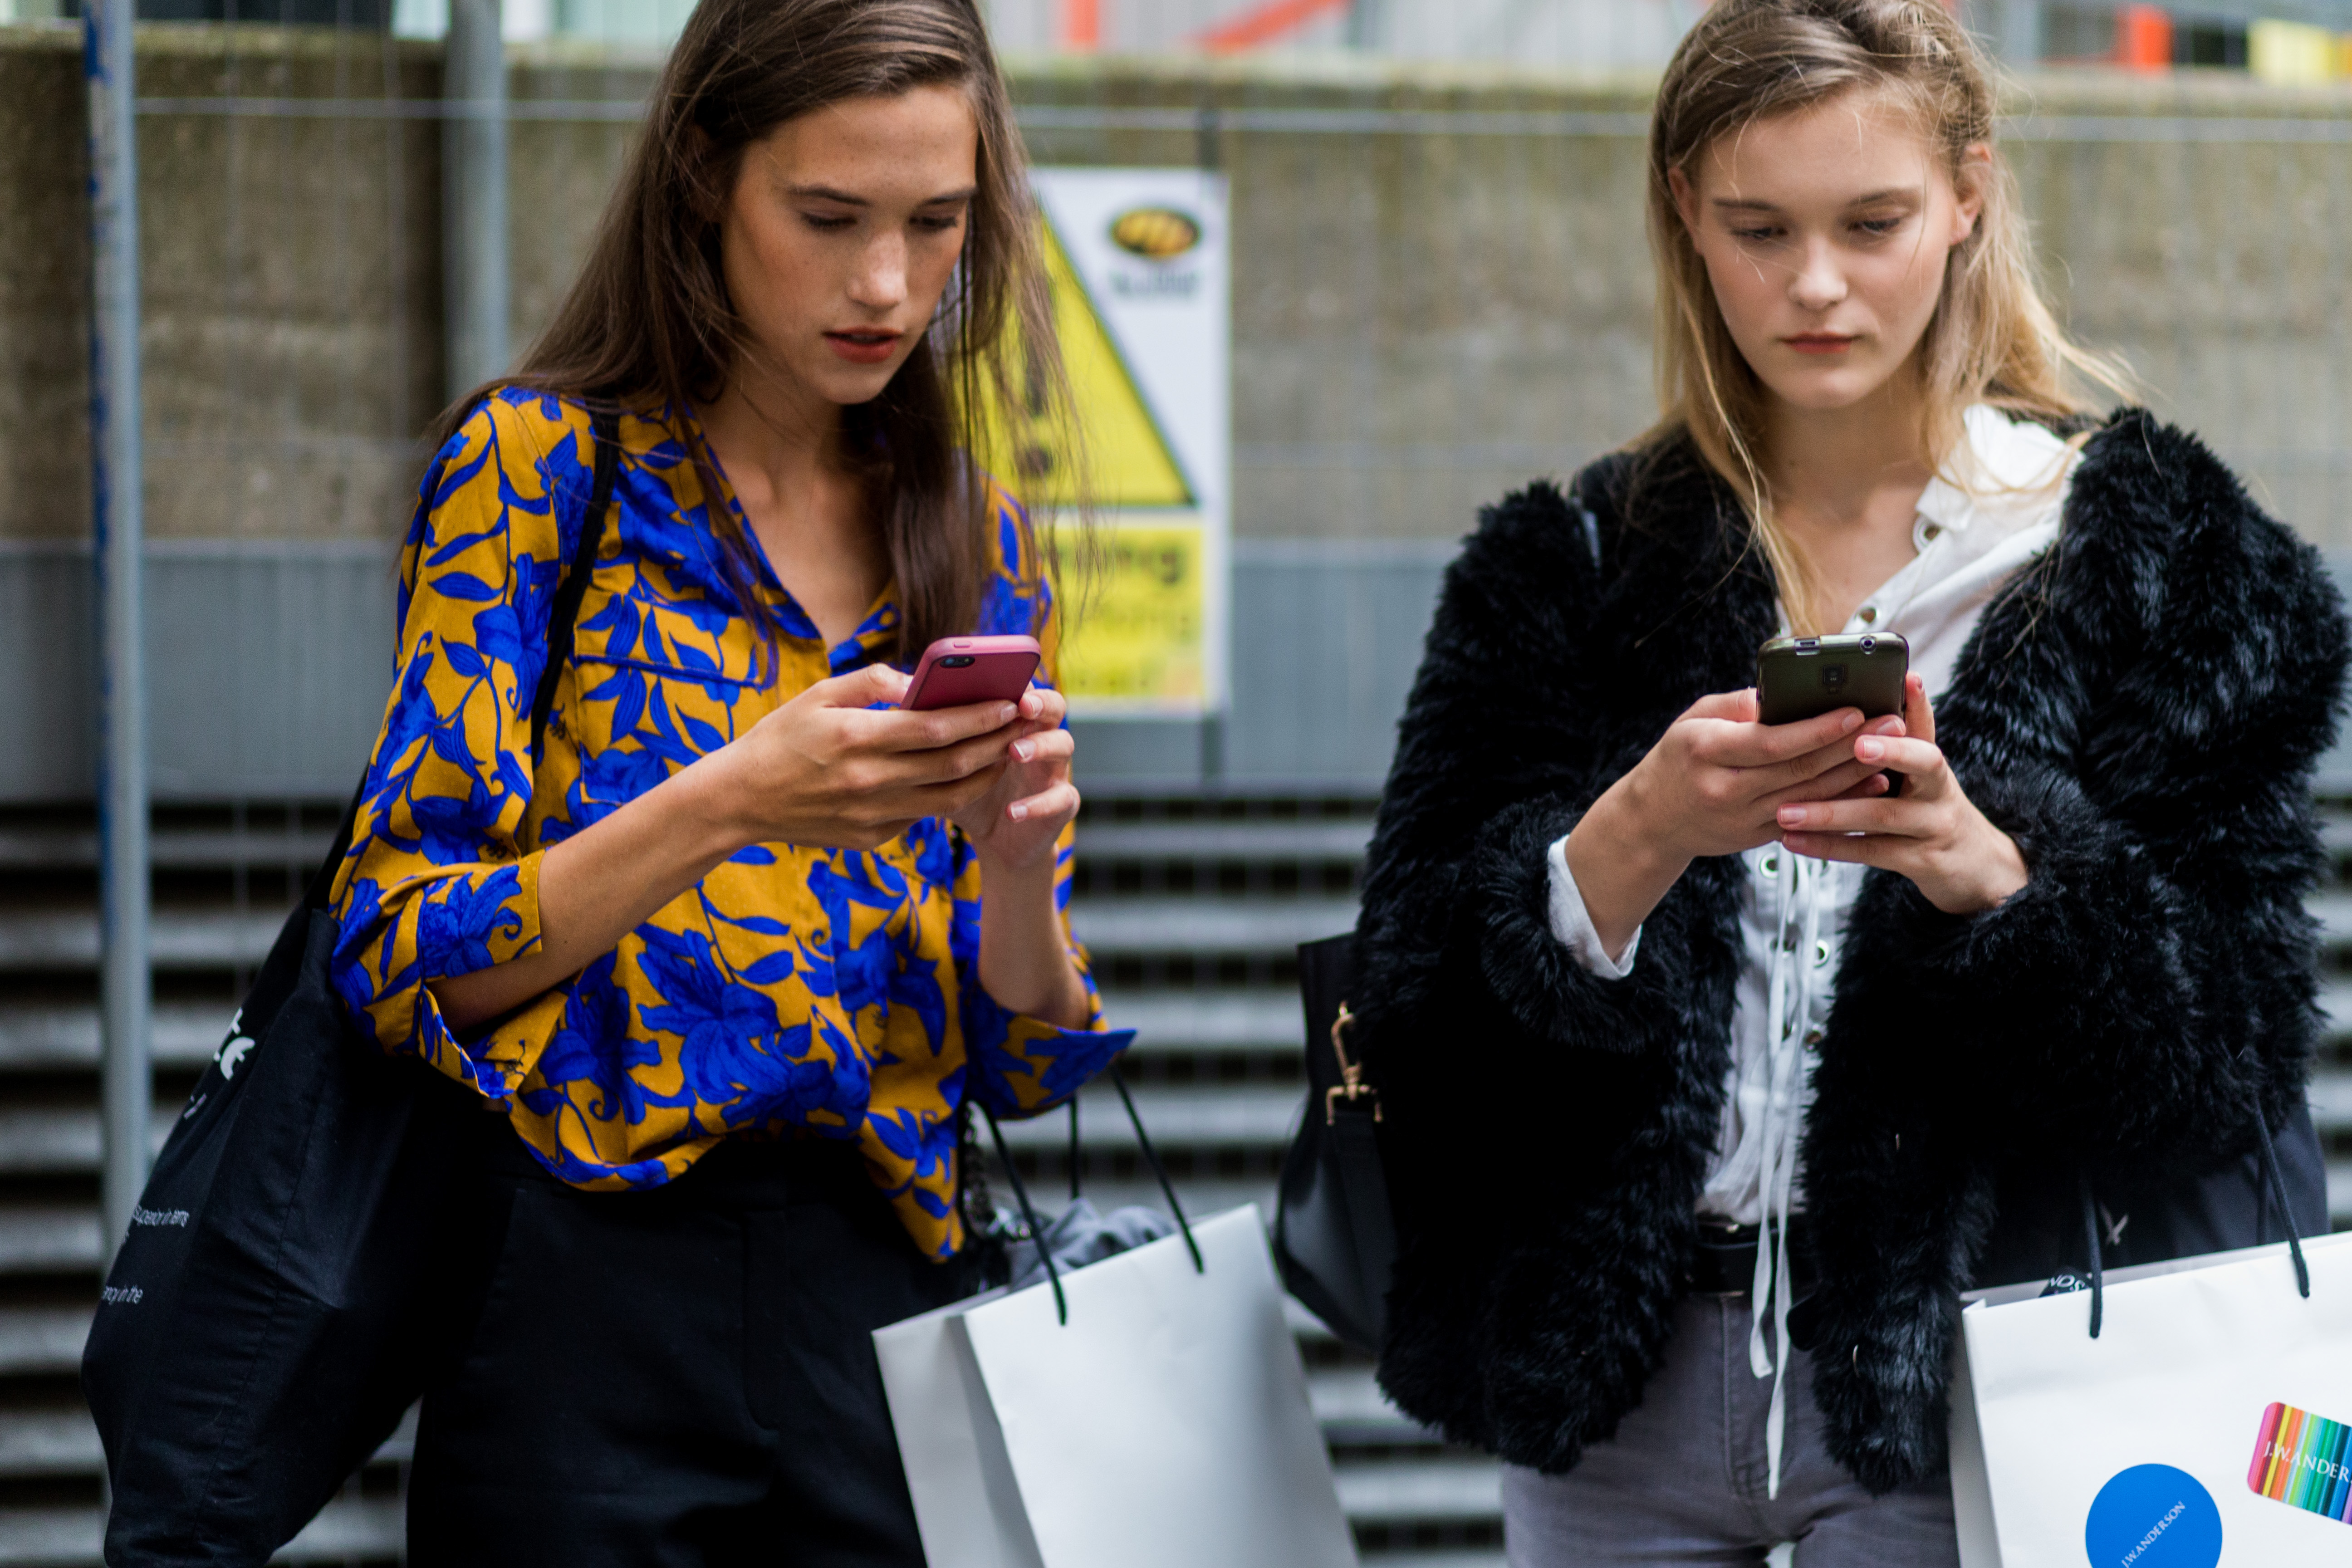 LONDON, ENGLAND - SEPTEMBER 17: Models on their phone outside of JW Anderson during London Fashion Week Spring/Summer collections 2017 on September 17, 2016 in London, United Kingdom. (Photo by Christian Vierig/Getty Images)